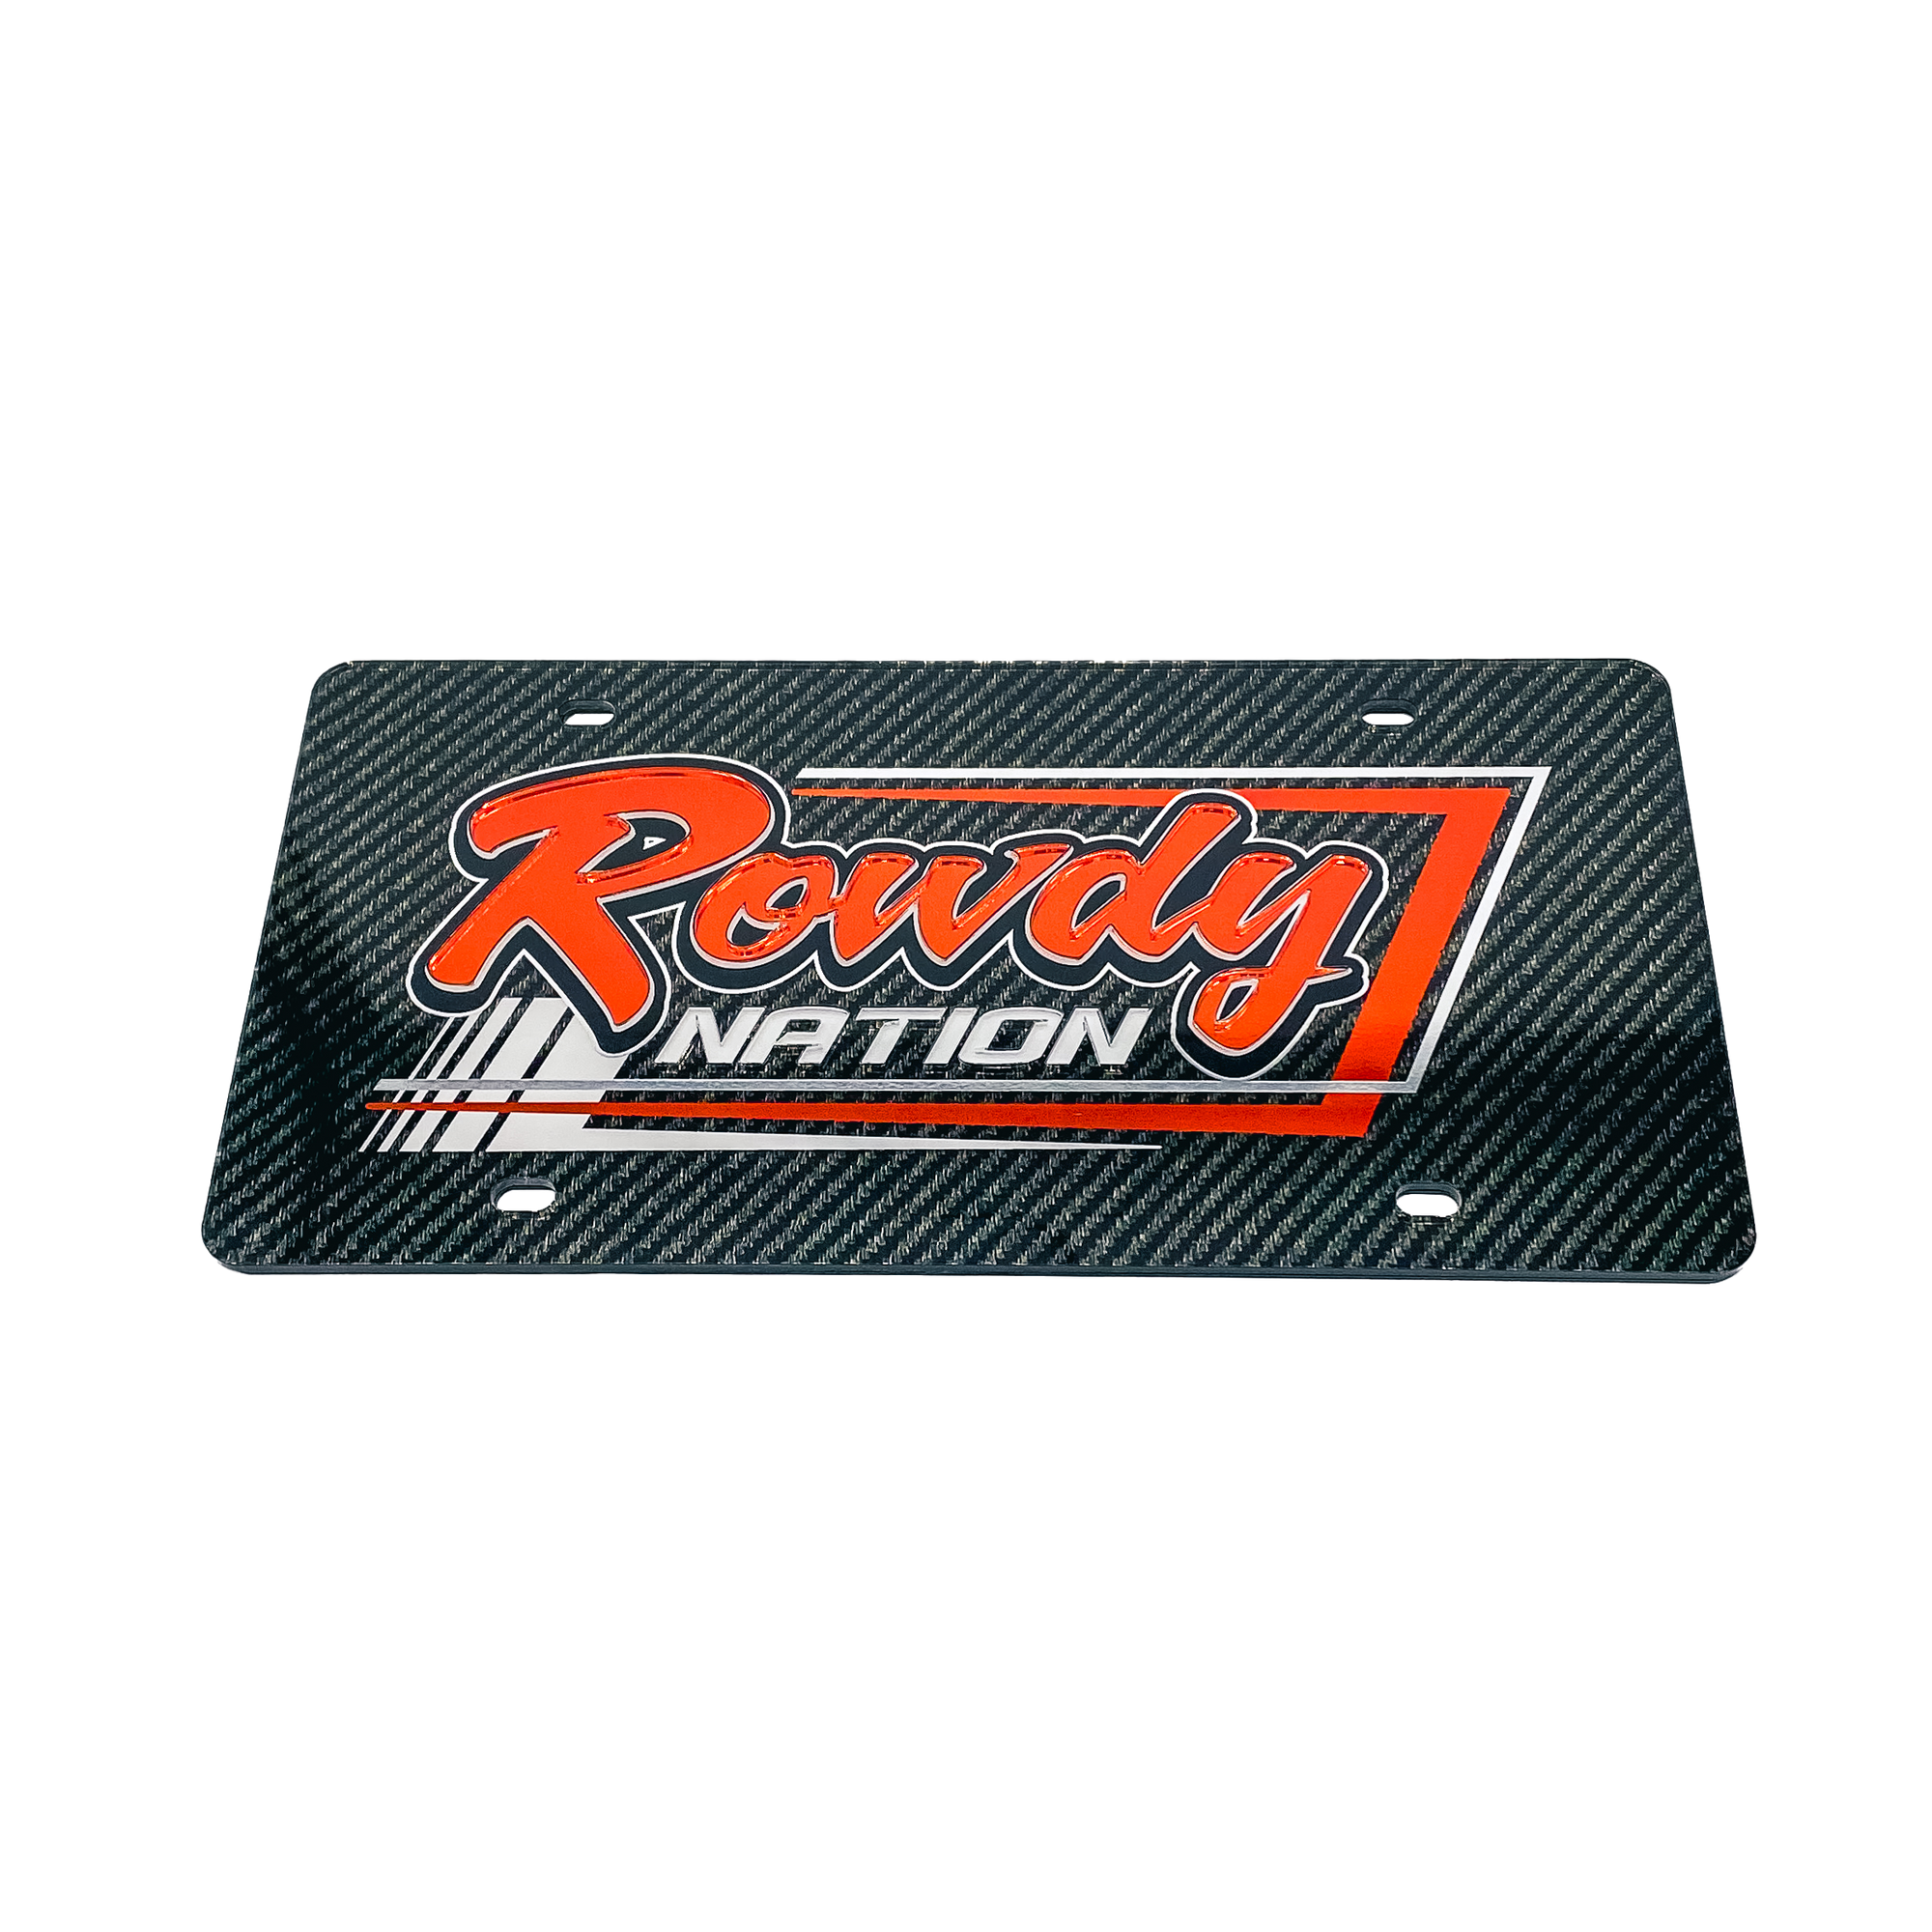 Rowdy Nation Acrylic License Plate